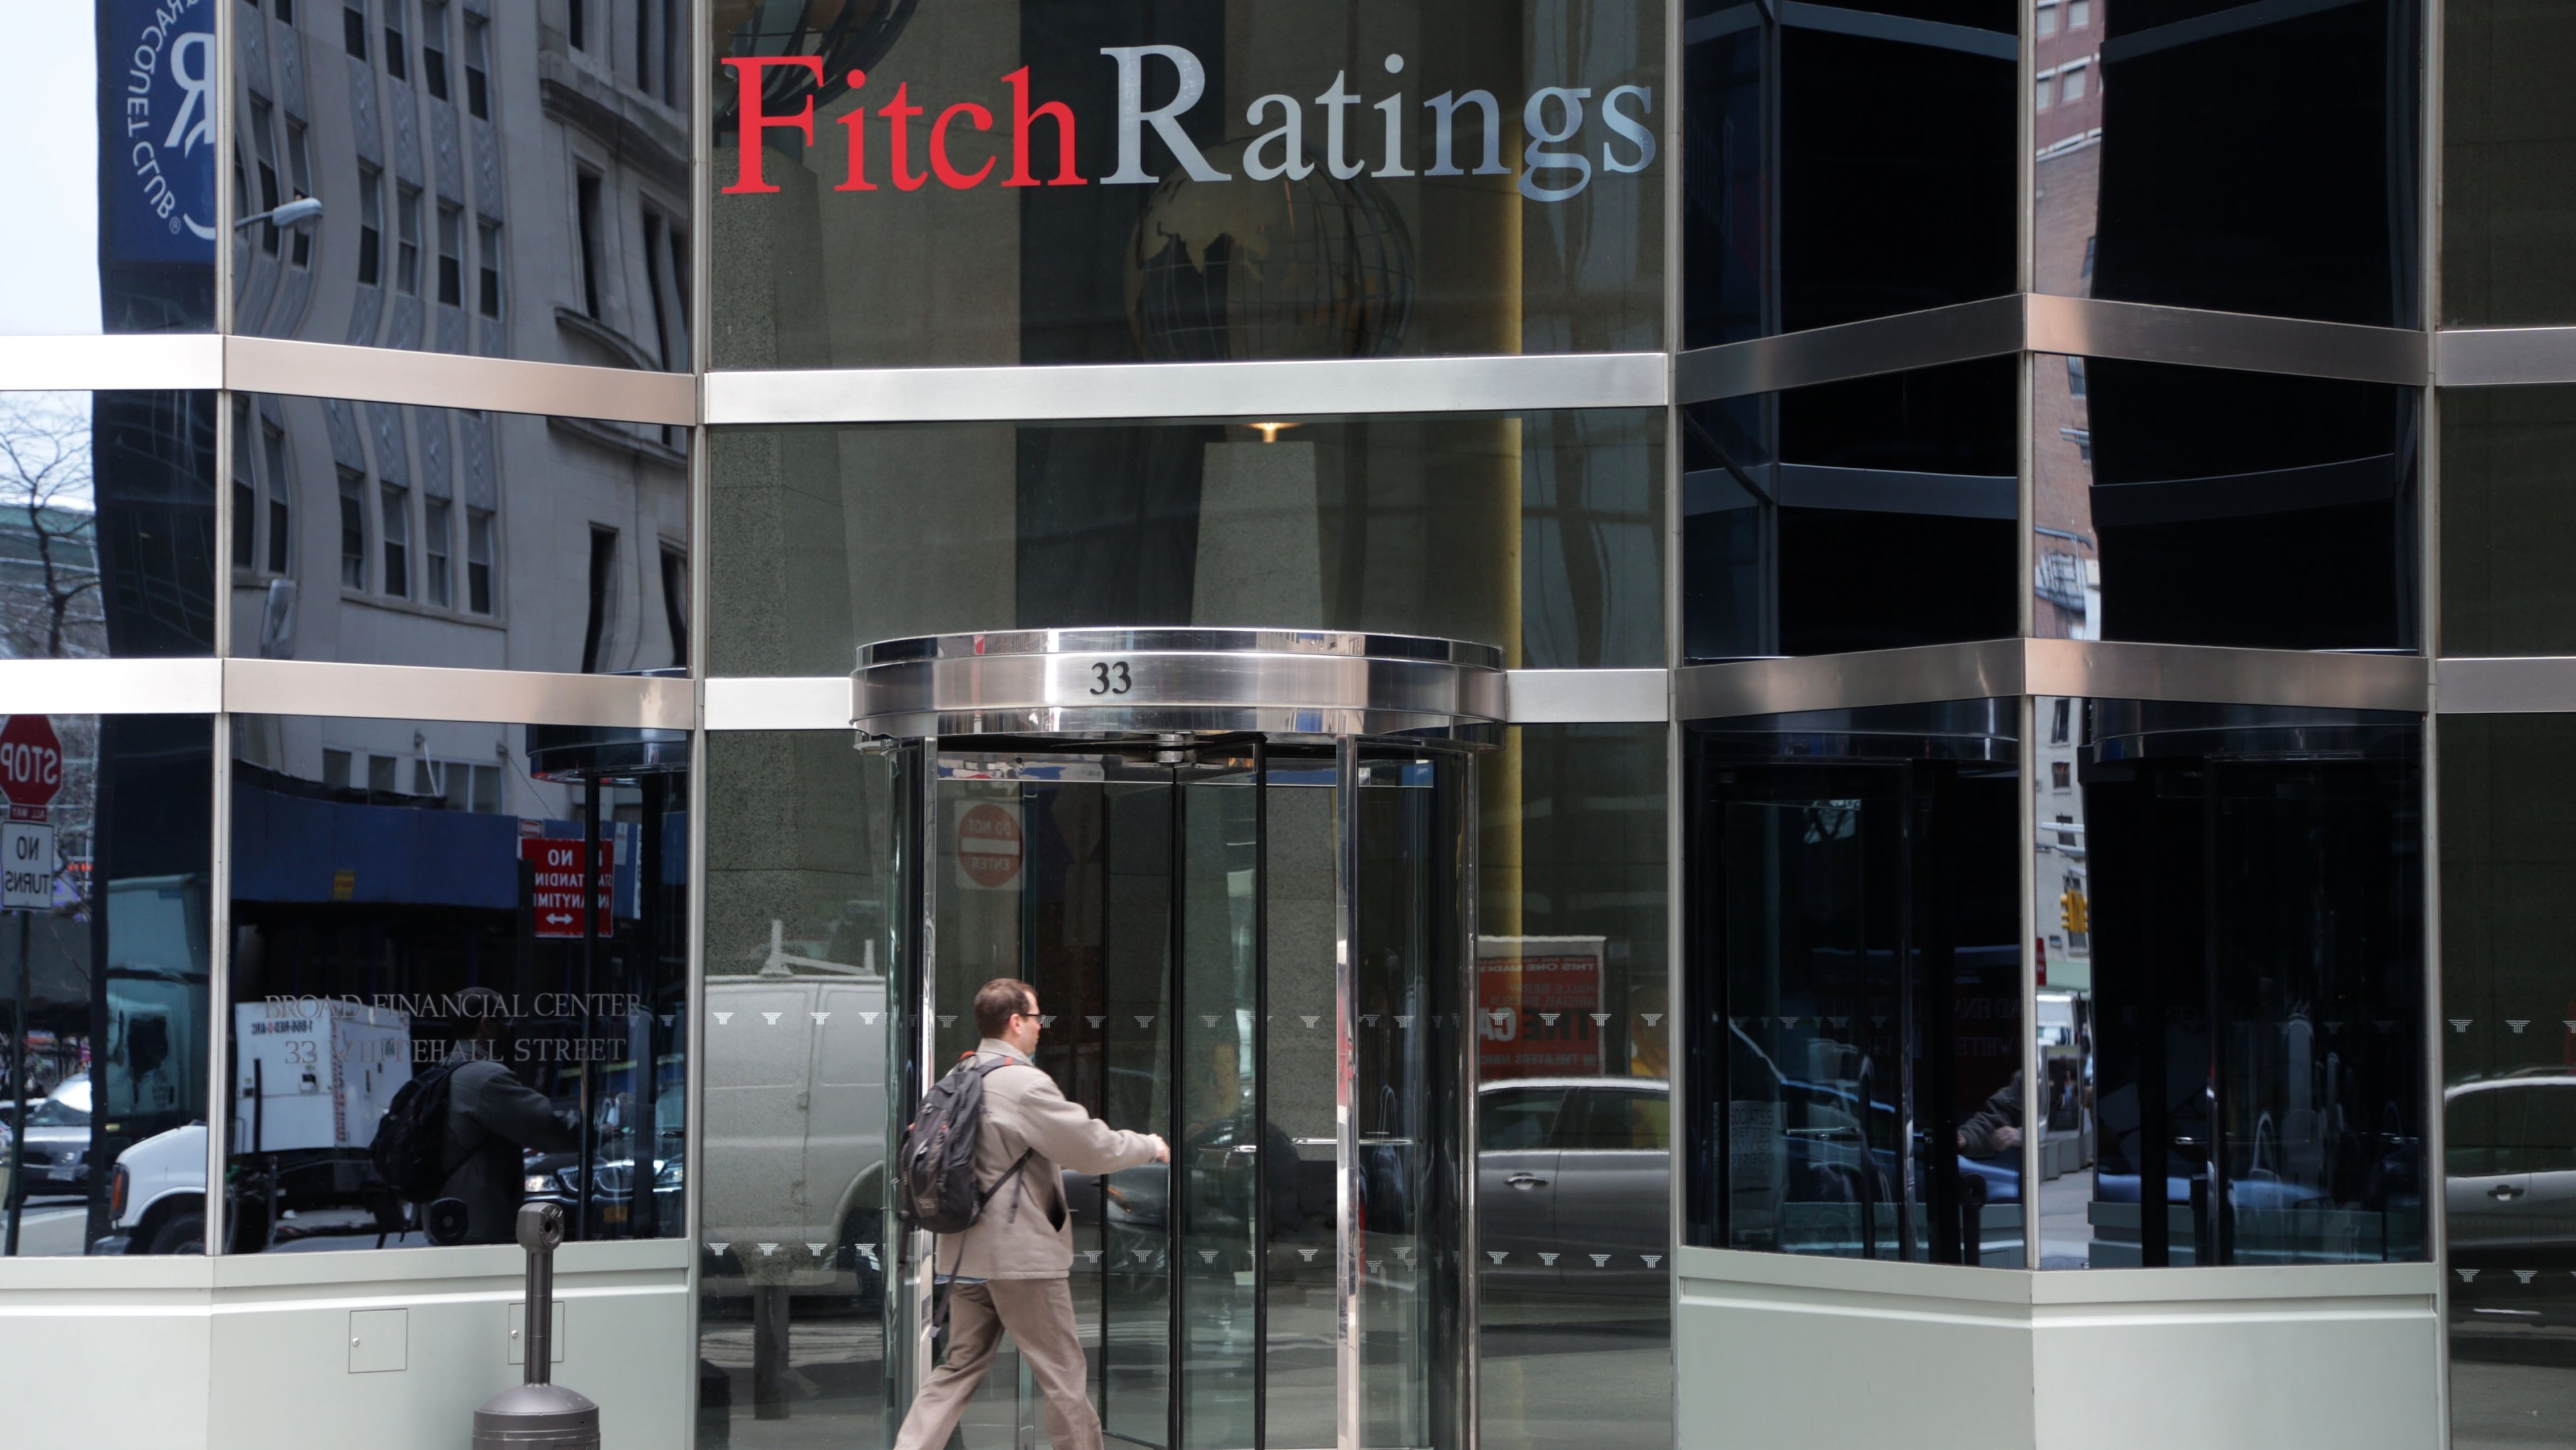 Fitch Ratings Zentrale in New York